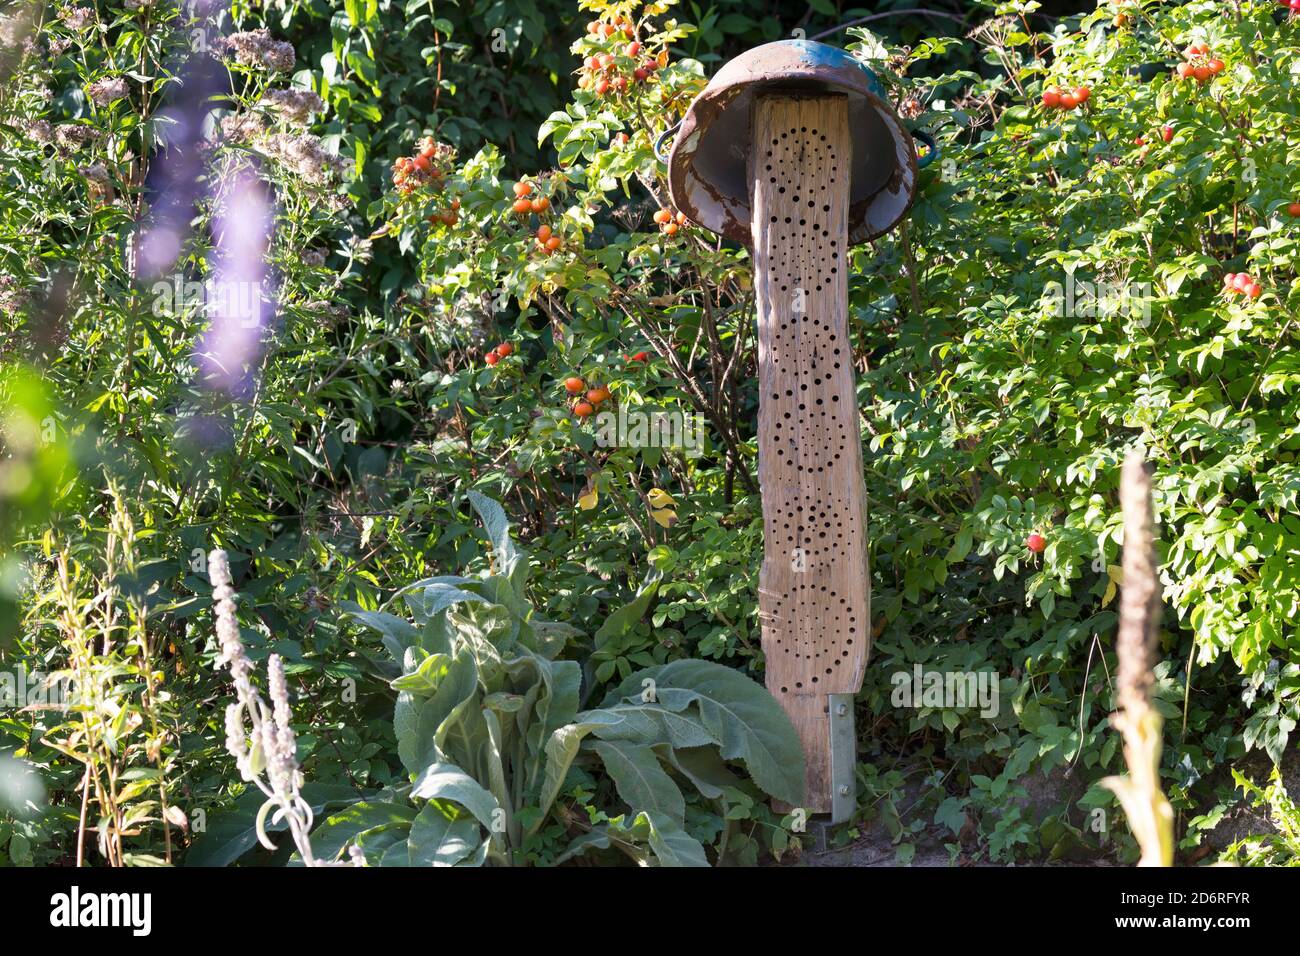 selfmade insect hotel for wild bees made with an oak trunk, Germany Stock Photo